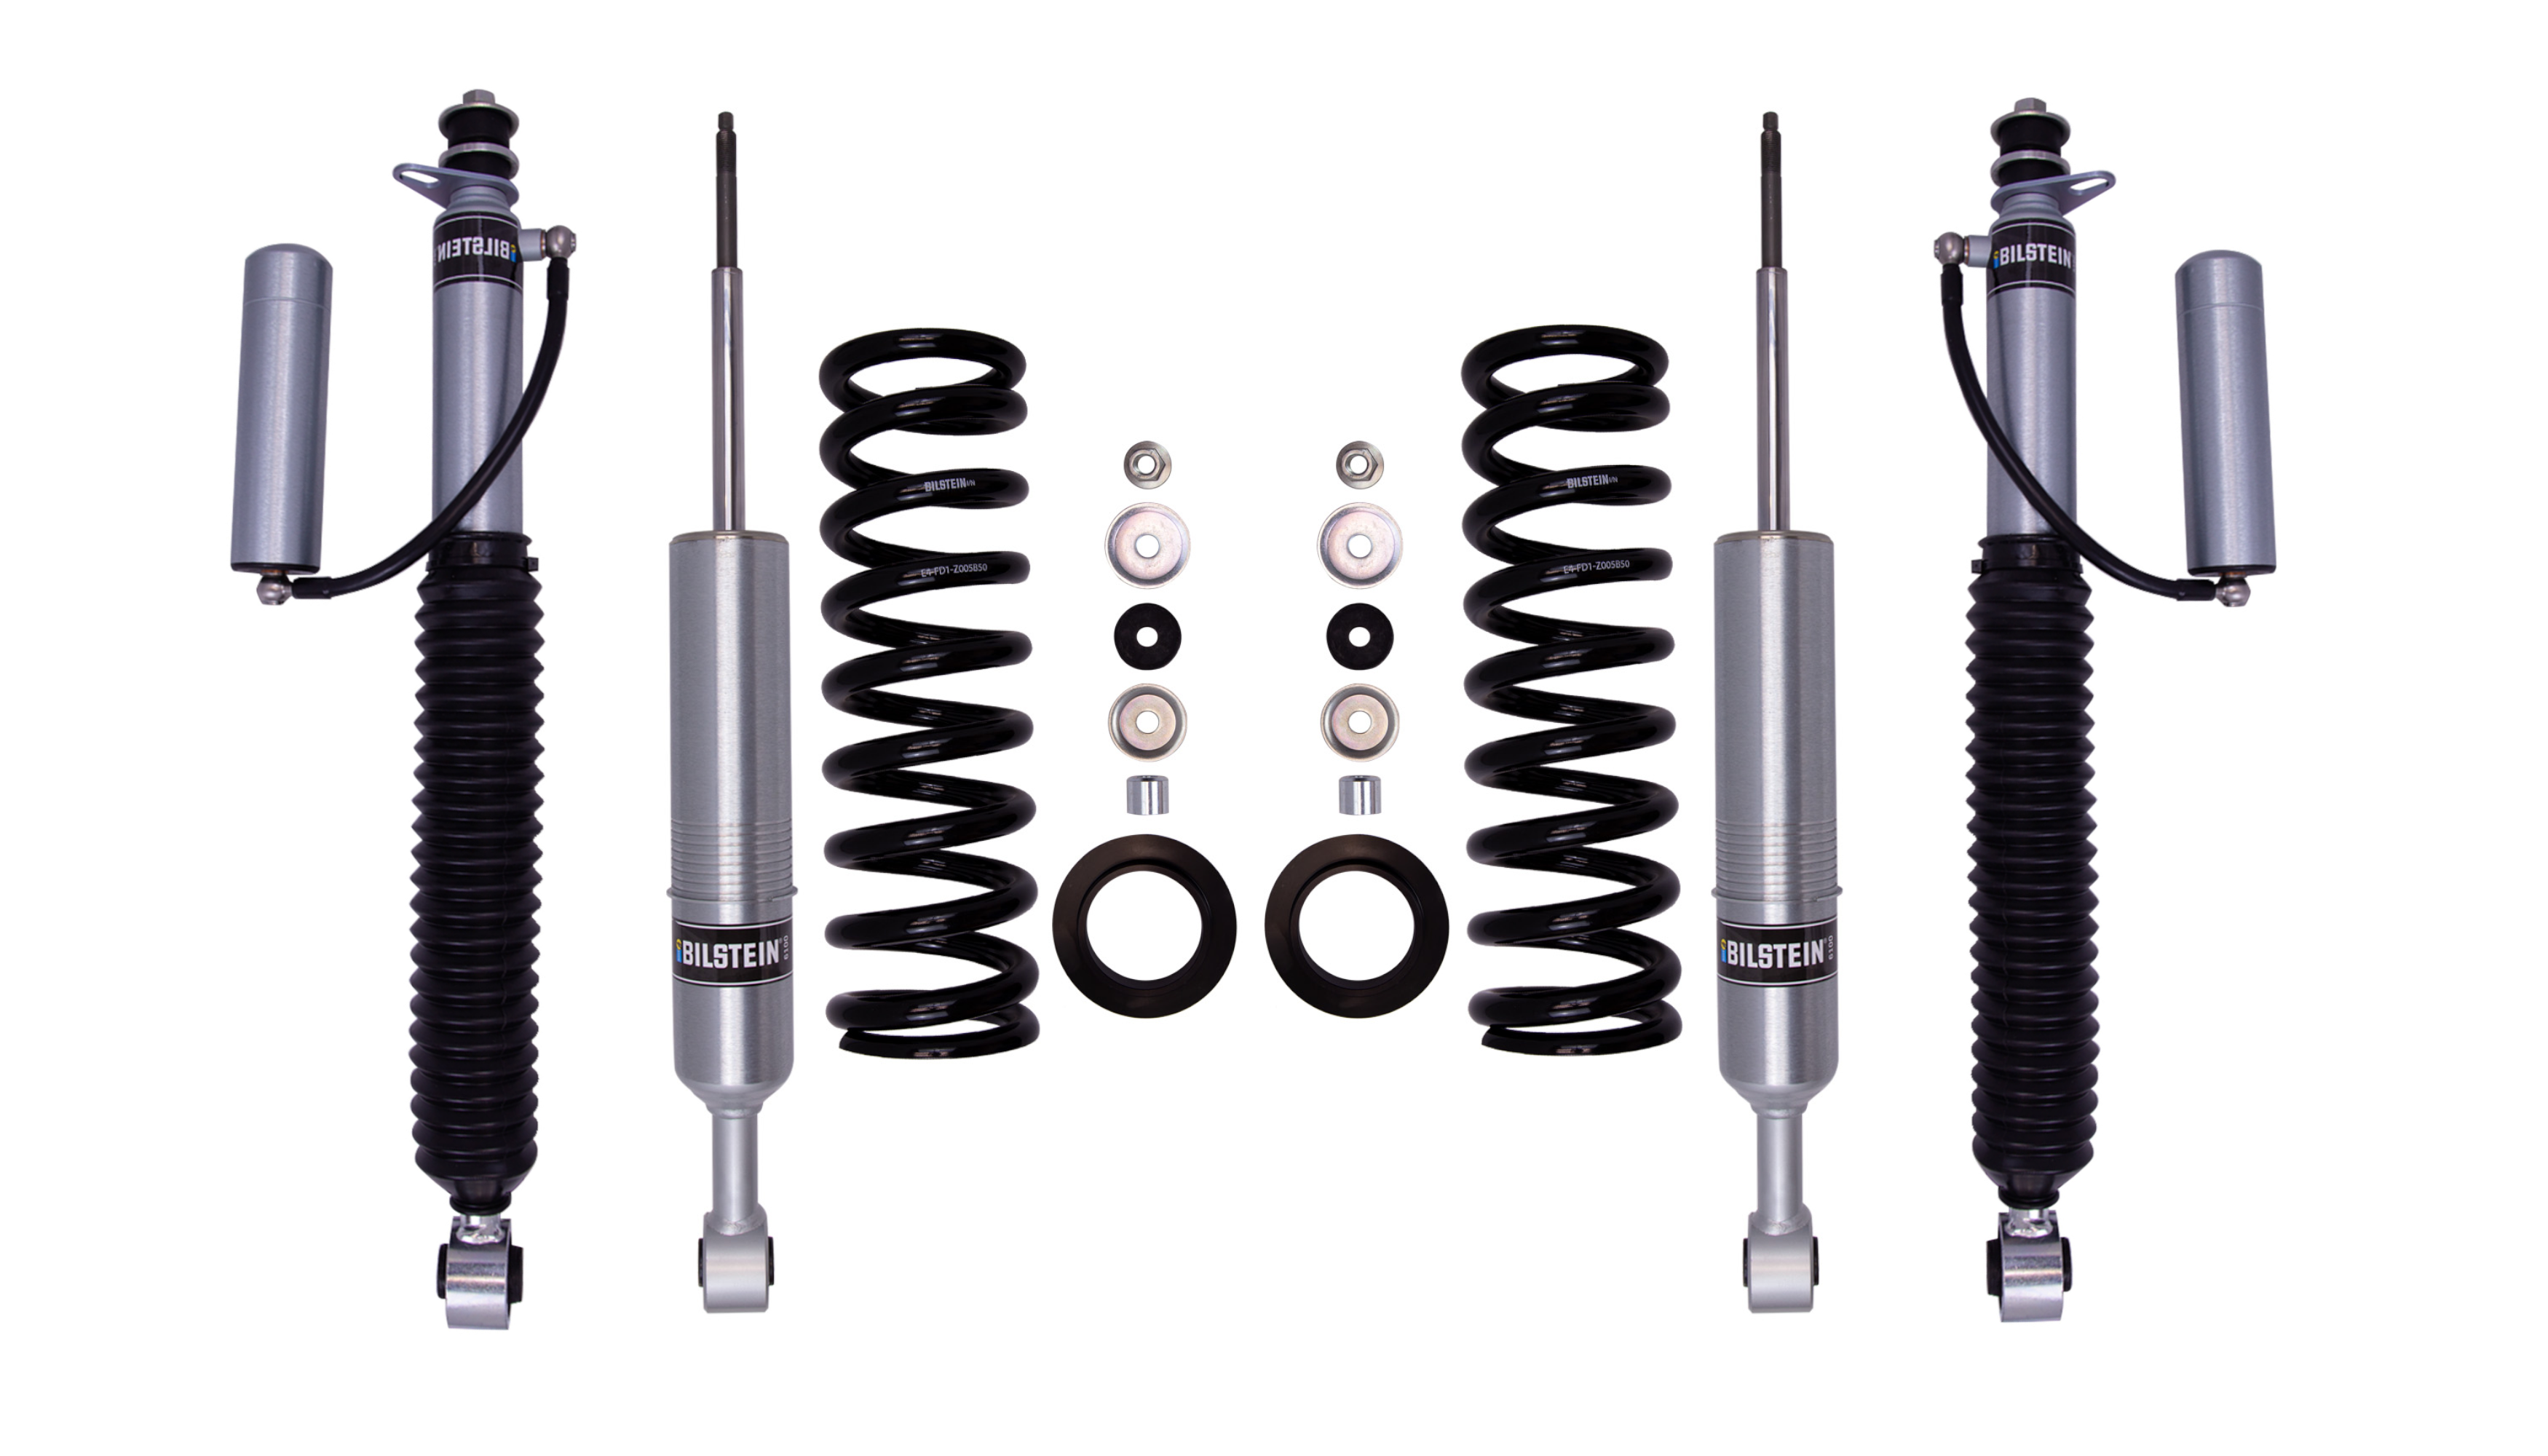 Bilstein 6112 0-3.5 Front Assembled Coilovers, 5160 0-2 Rear